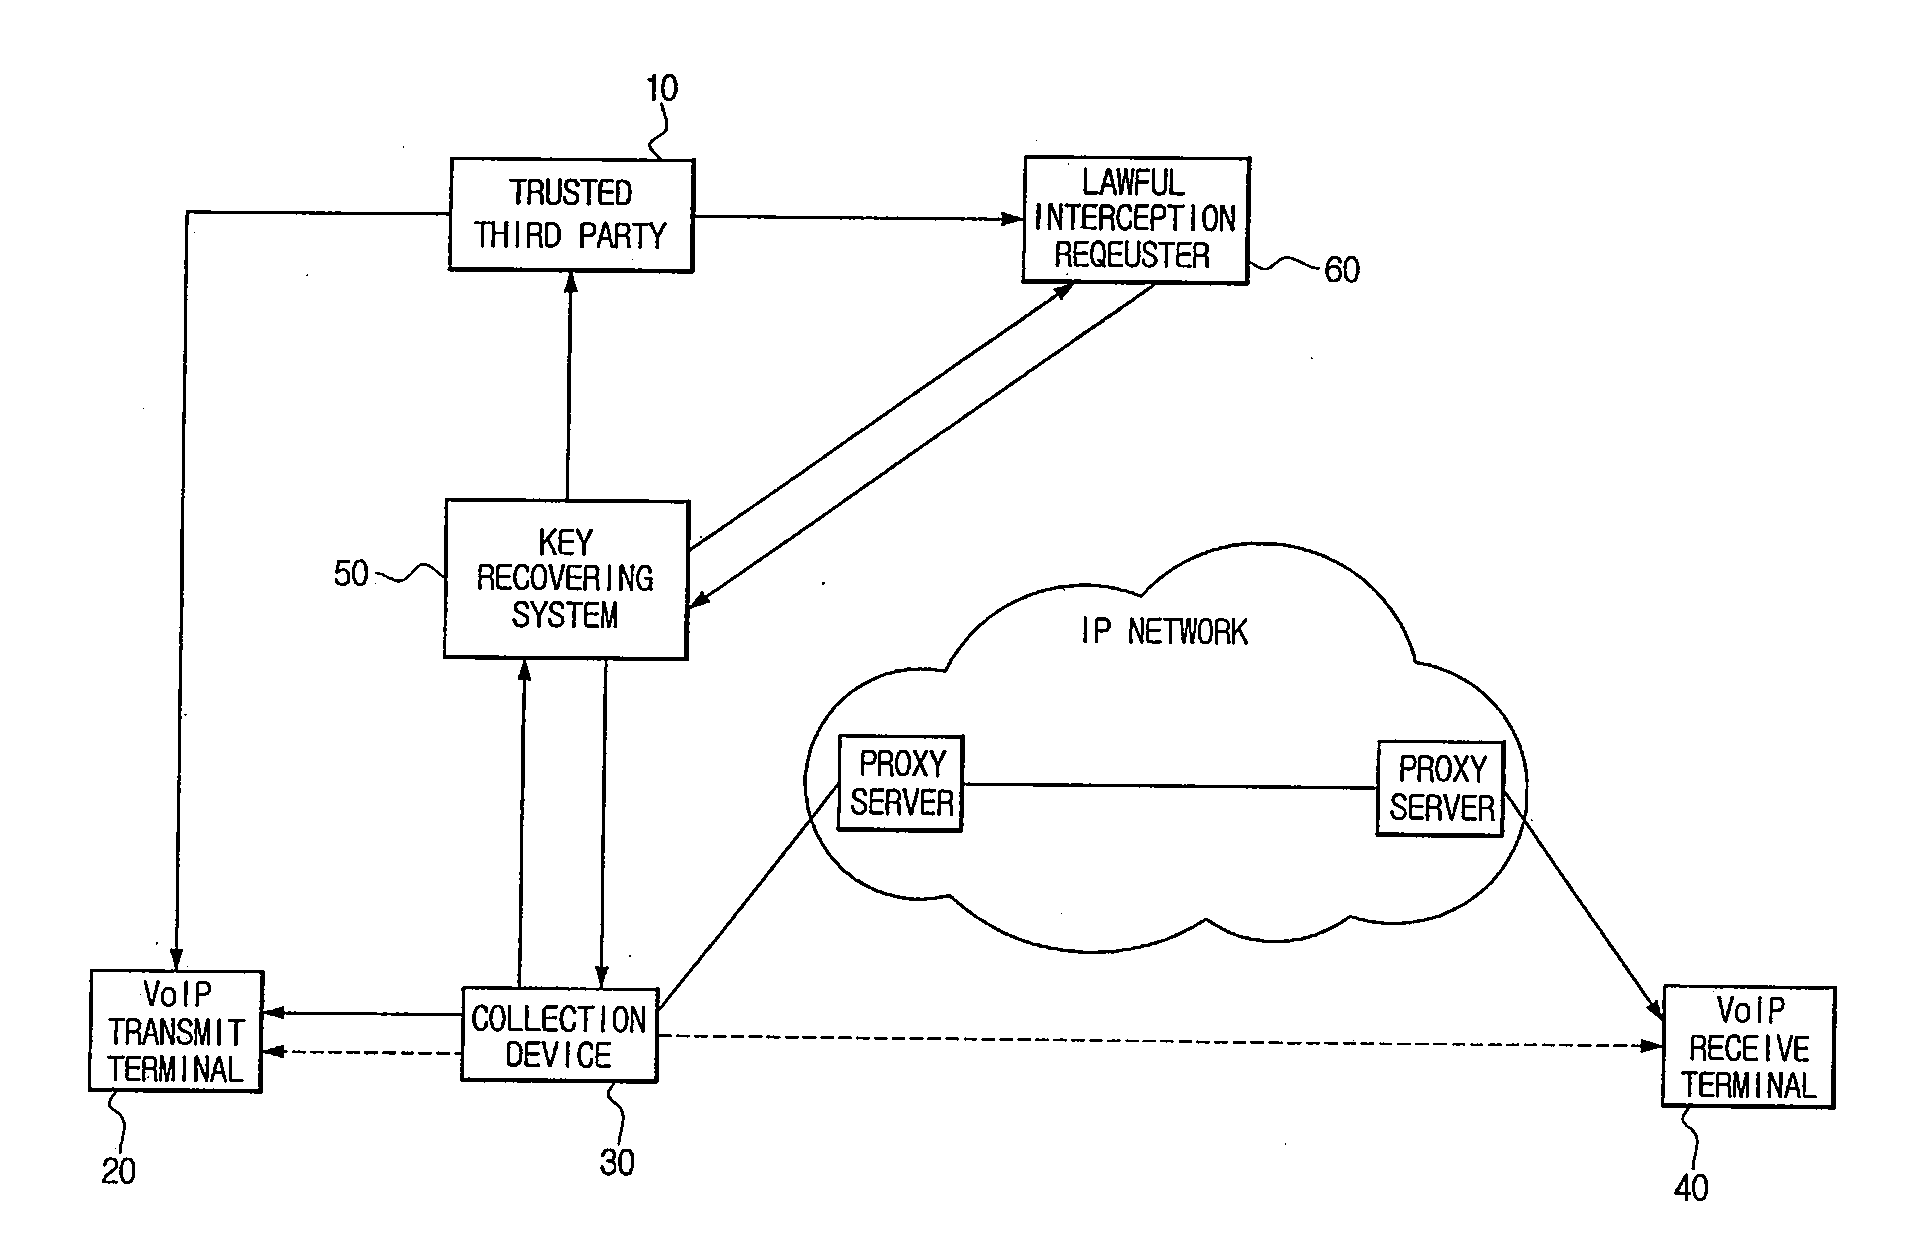 SYSTEM AND METHOD FOR LAWFUL INTERCEPTION USING TRUSTED THIRD PARTIES IN SECURE VoIP COMMUNICATIONS